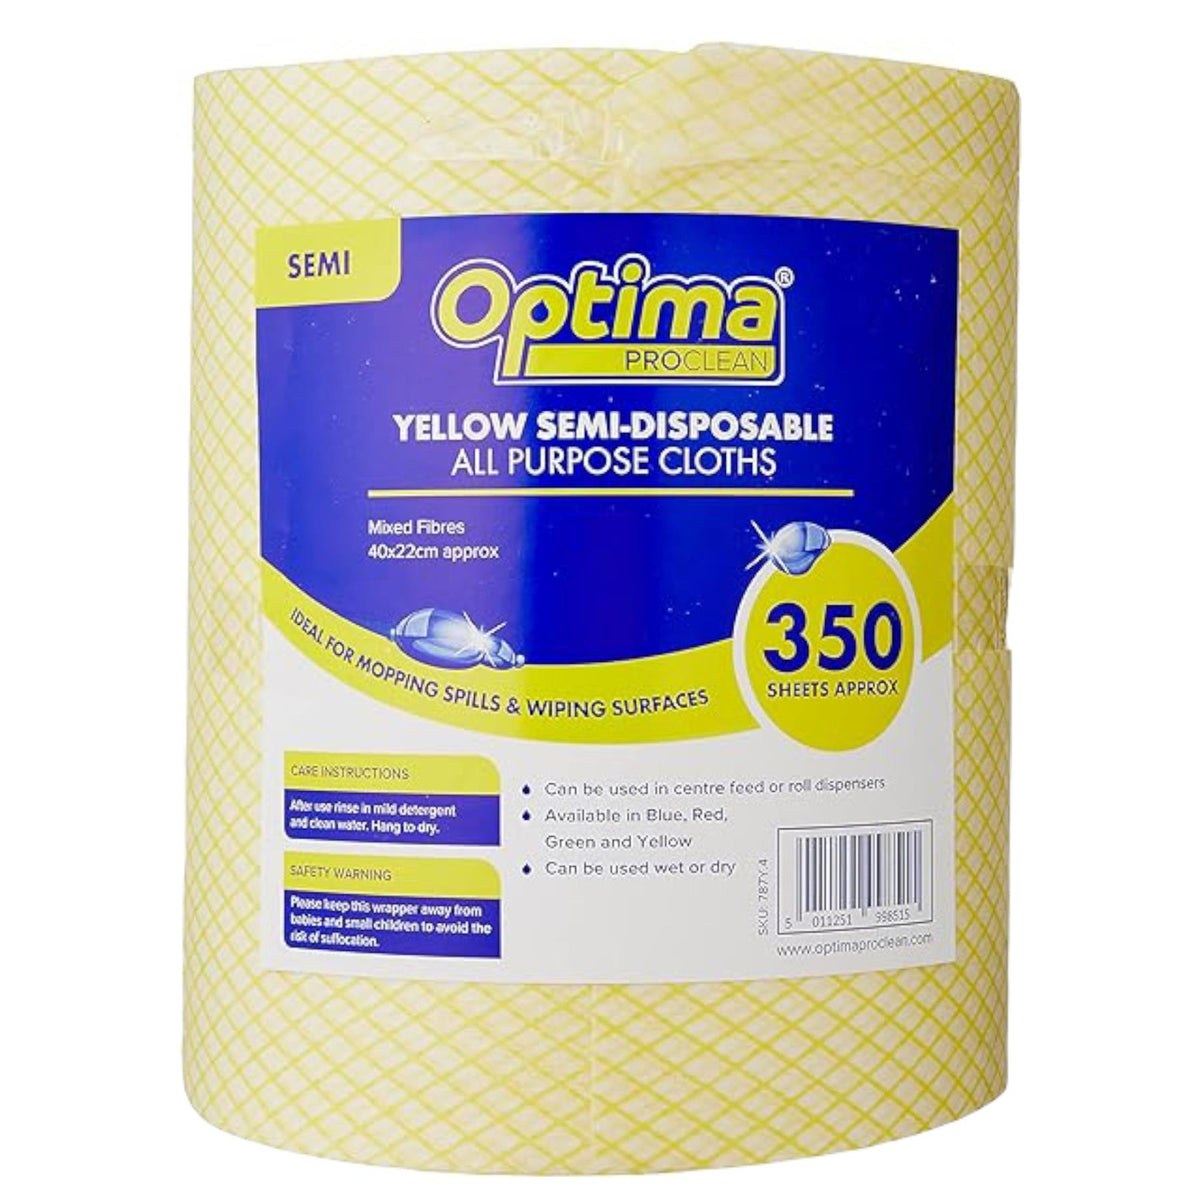 Optima Proclean Lightweight All Purpose Cleaning Cloths 350 Yellow